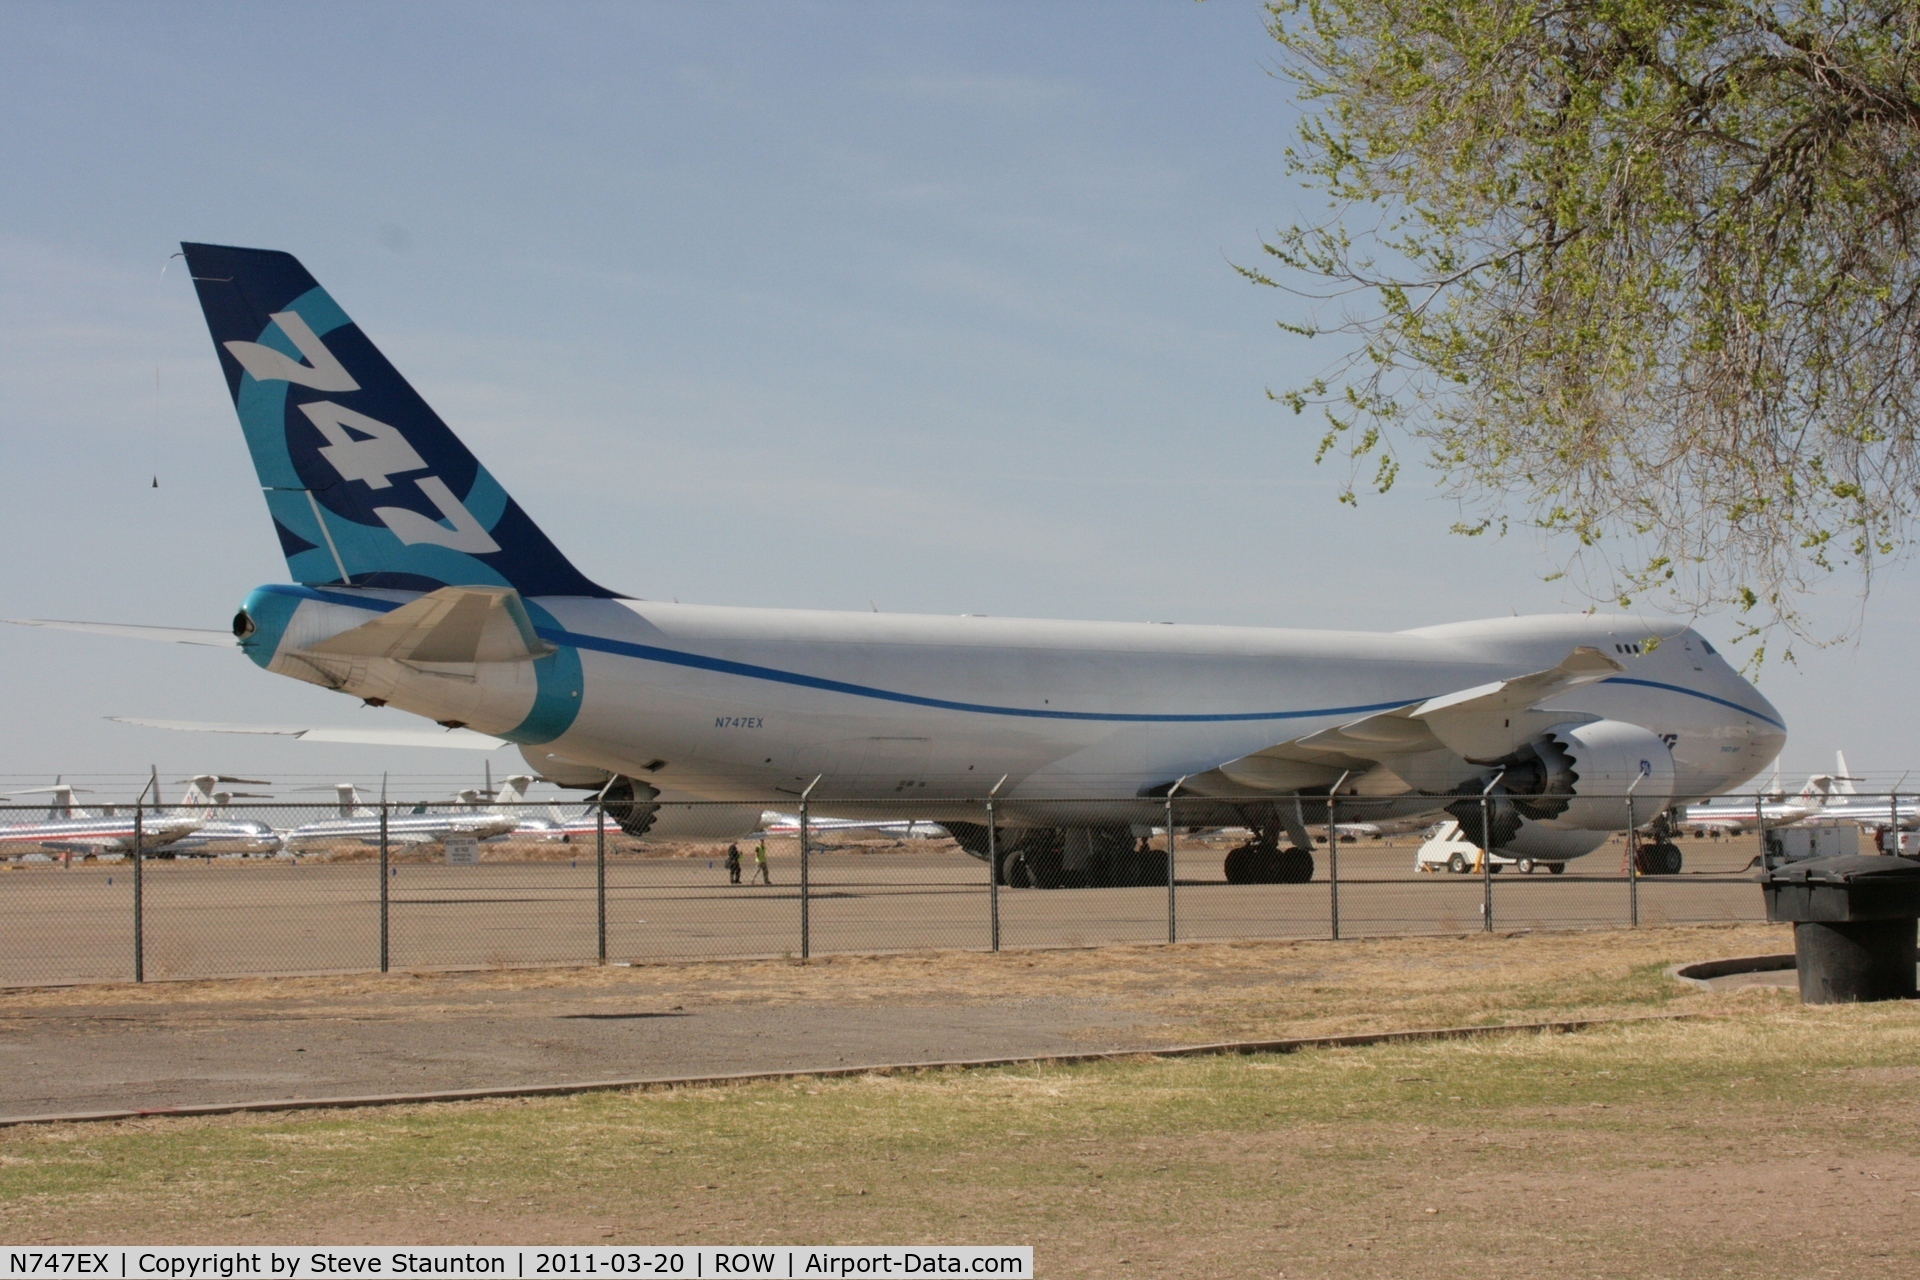 N747EX, 2010 Boeing 747-8F C/N 35808, Taken at Roswell International Air Centre Storage Facility, New Mexico in March 2011 whilst on an Aeroprint Aviation tour